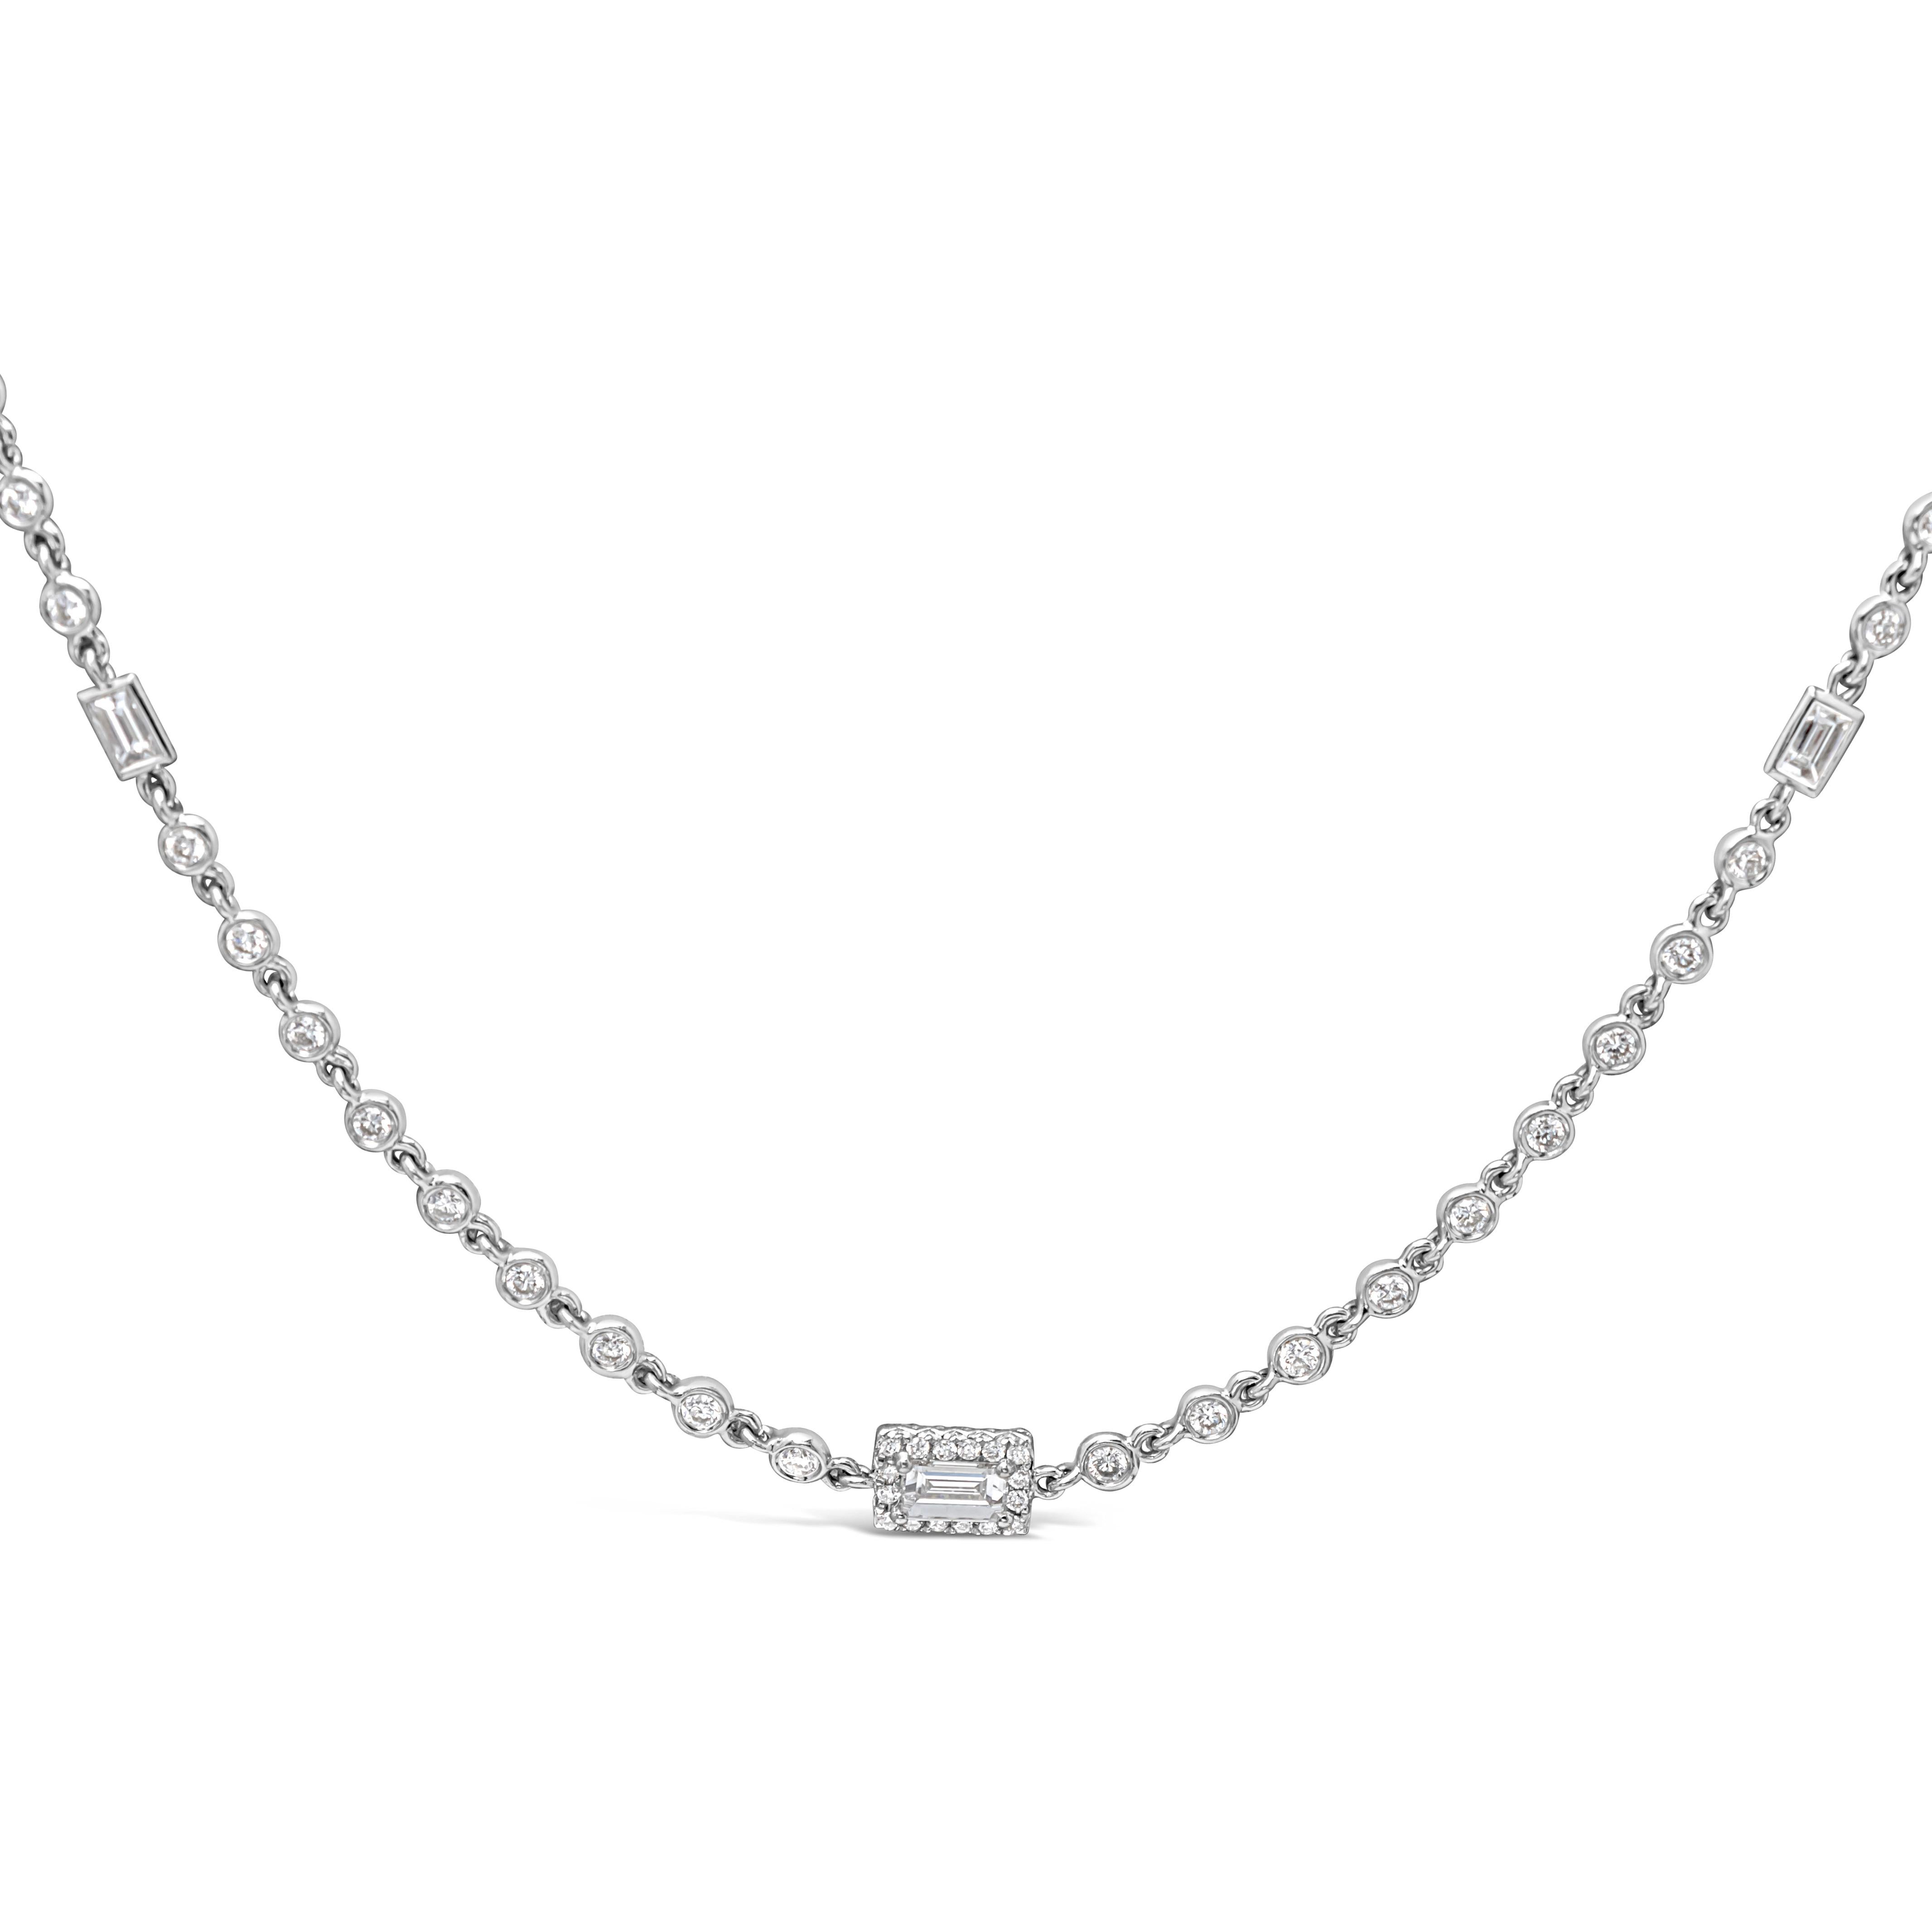 Showcasing a classic and stylish diamonds by the yard necklace accented with baguette cut diamonds, set in halo design with round  diamonds. Elegantly spaced with more bezel set round melee diamond in 18k white gold mounting. Diamonds weigh 6.54